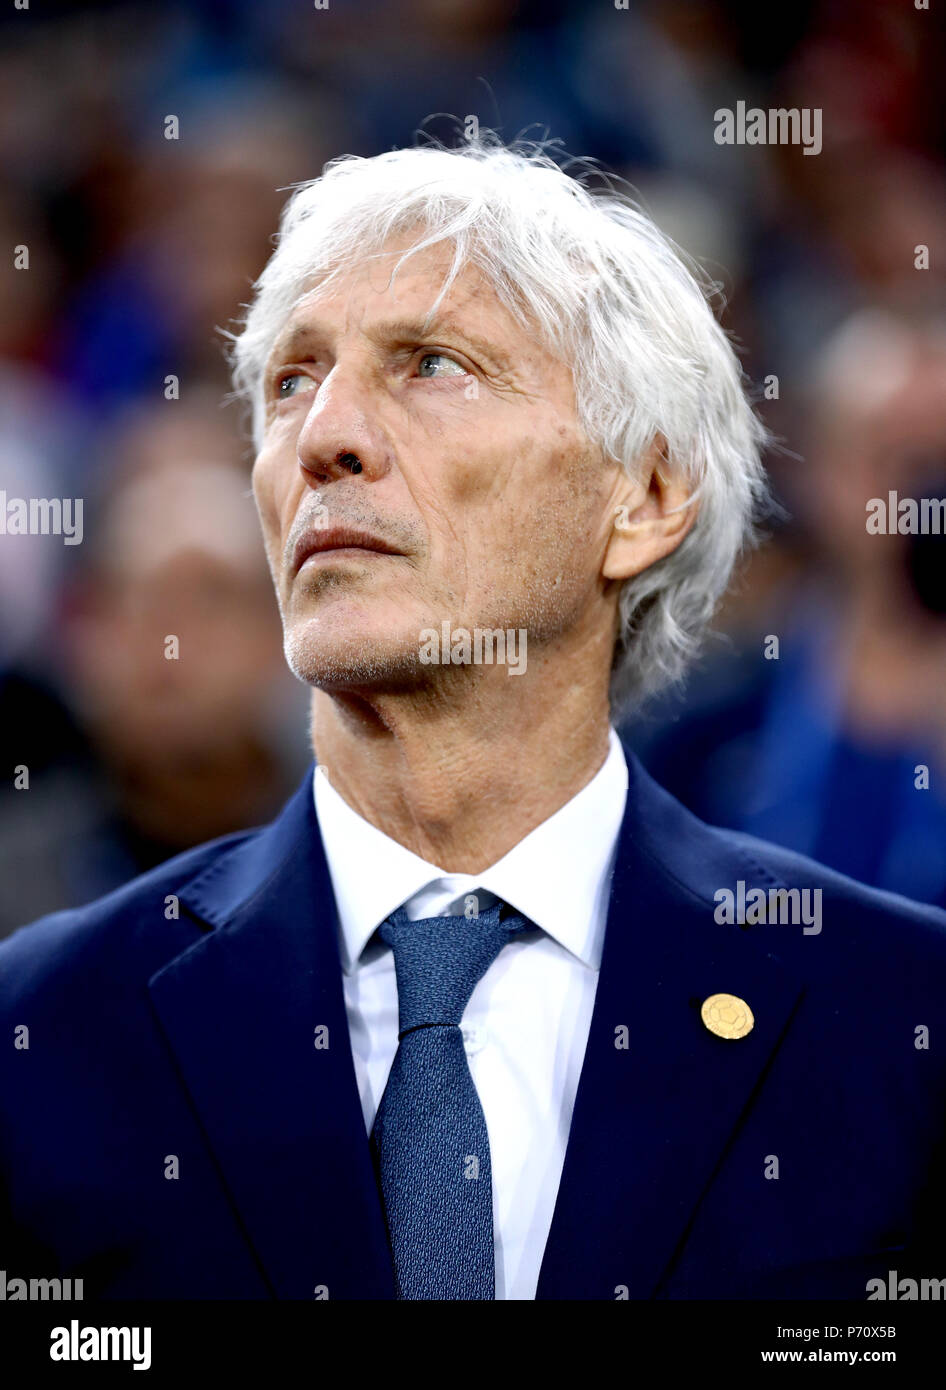 Colombia manager Jose Pekerman during the FIFA World Cup 2018, round of 16 match at the Spartak Stadium, Moscow. Stock Photo